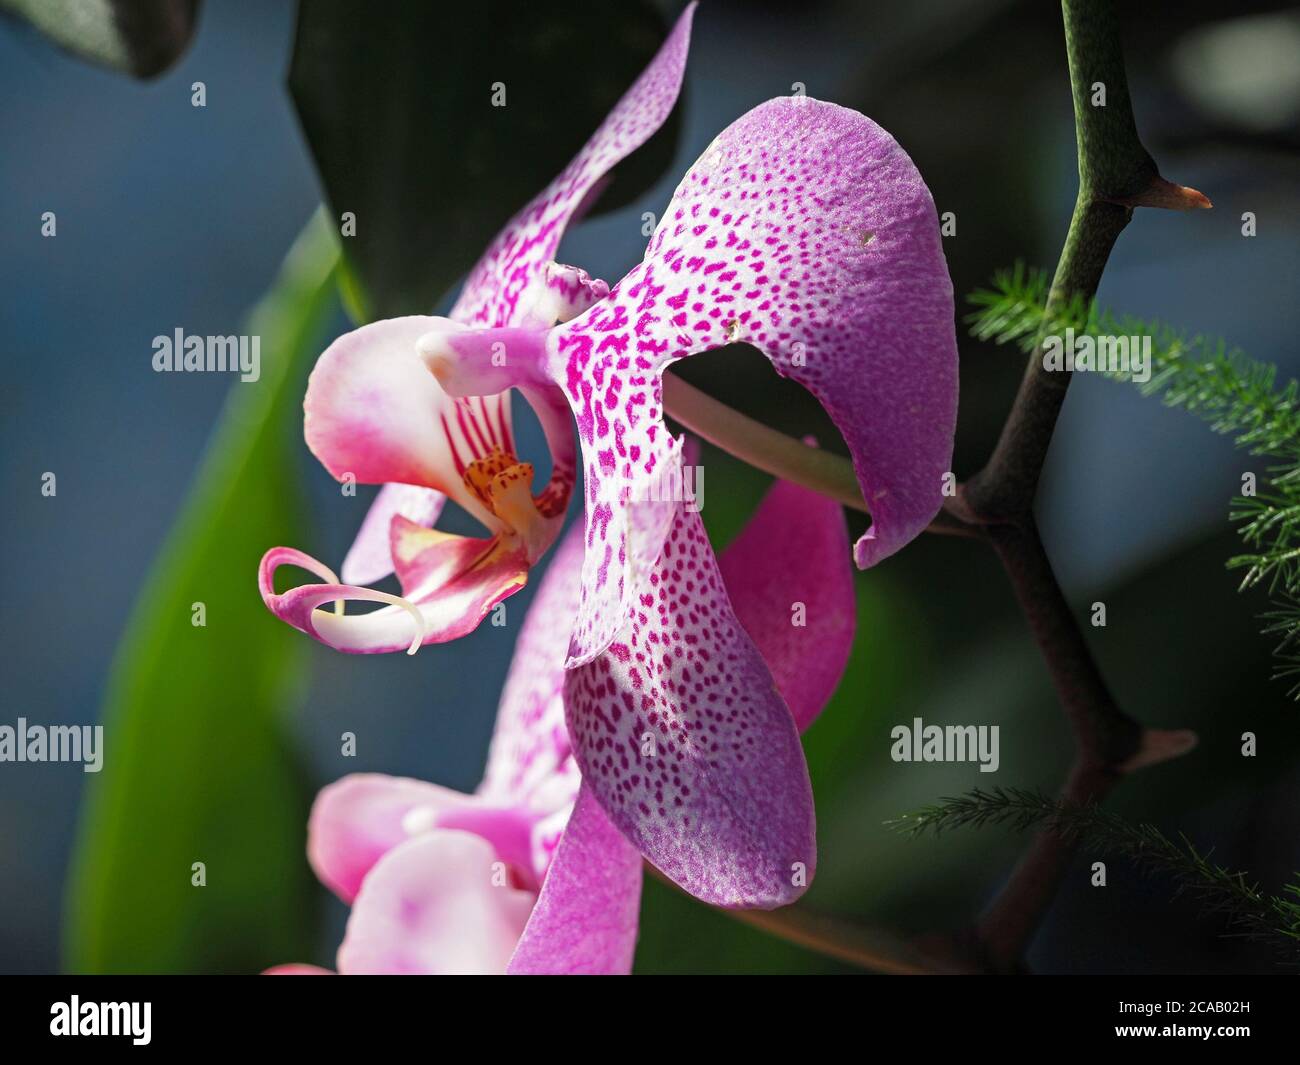 colourful structural flower of exotic tropical orchid with irregular purple lilac spots on white petals & sepals with elaborate pollinia Stock Photo